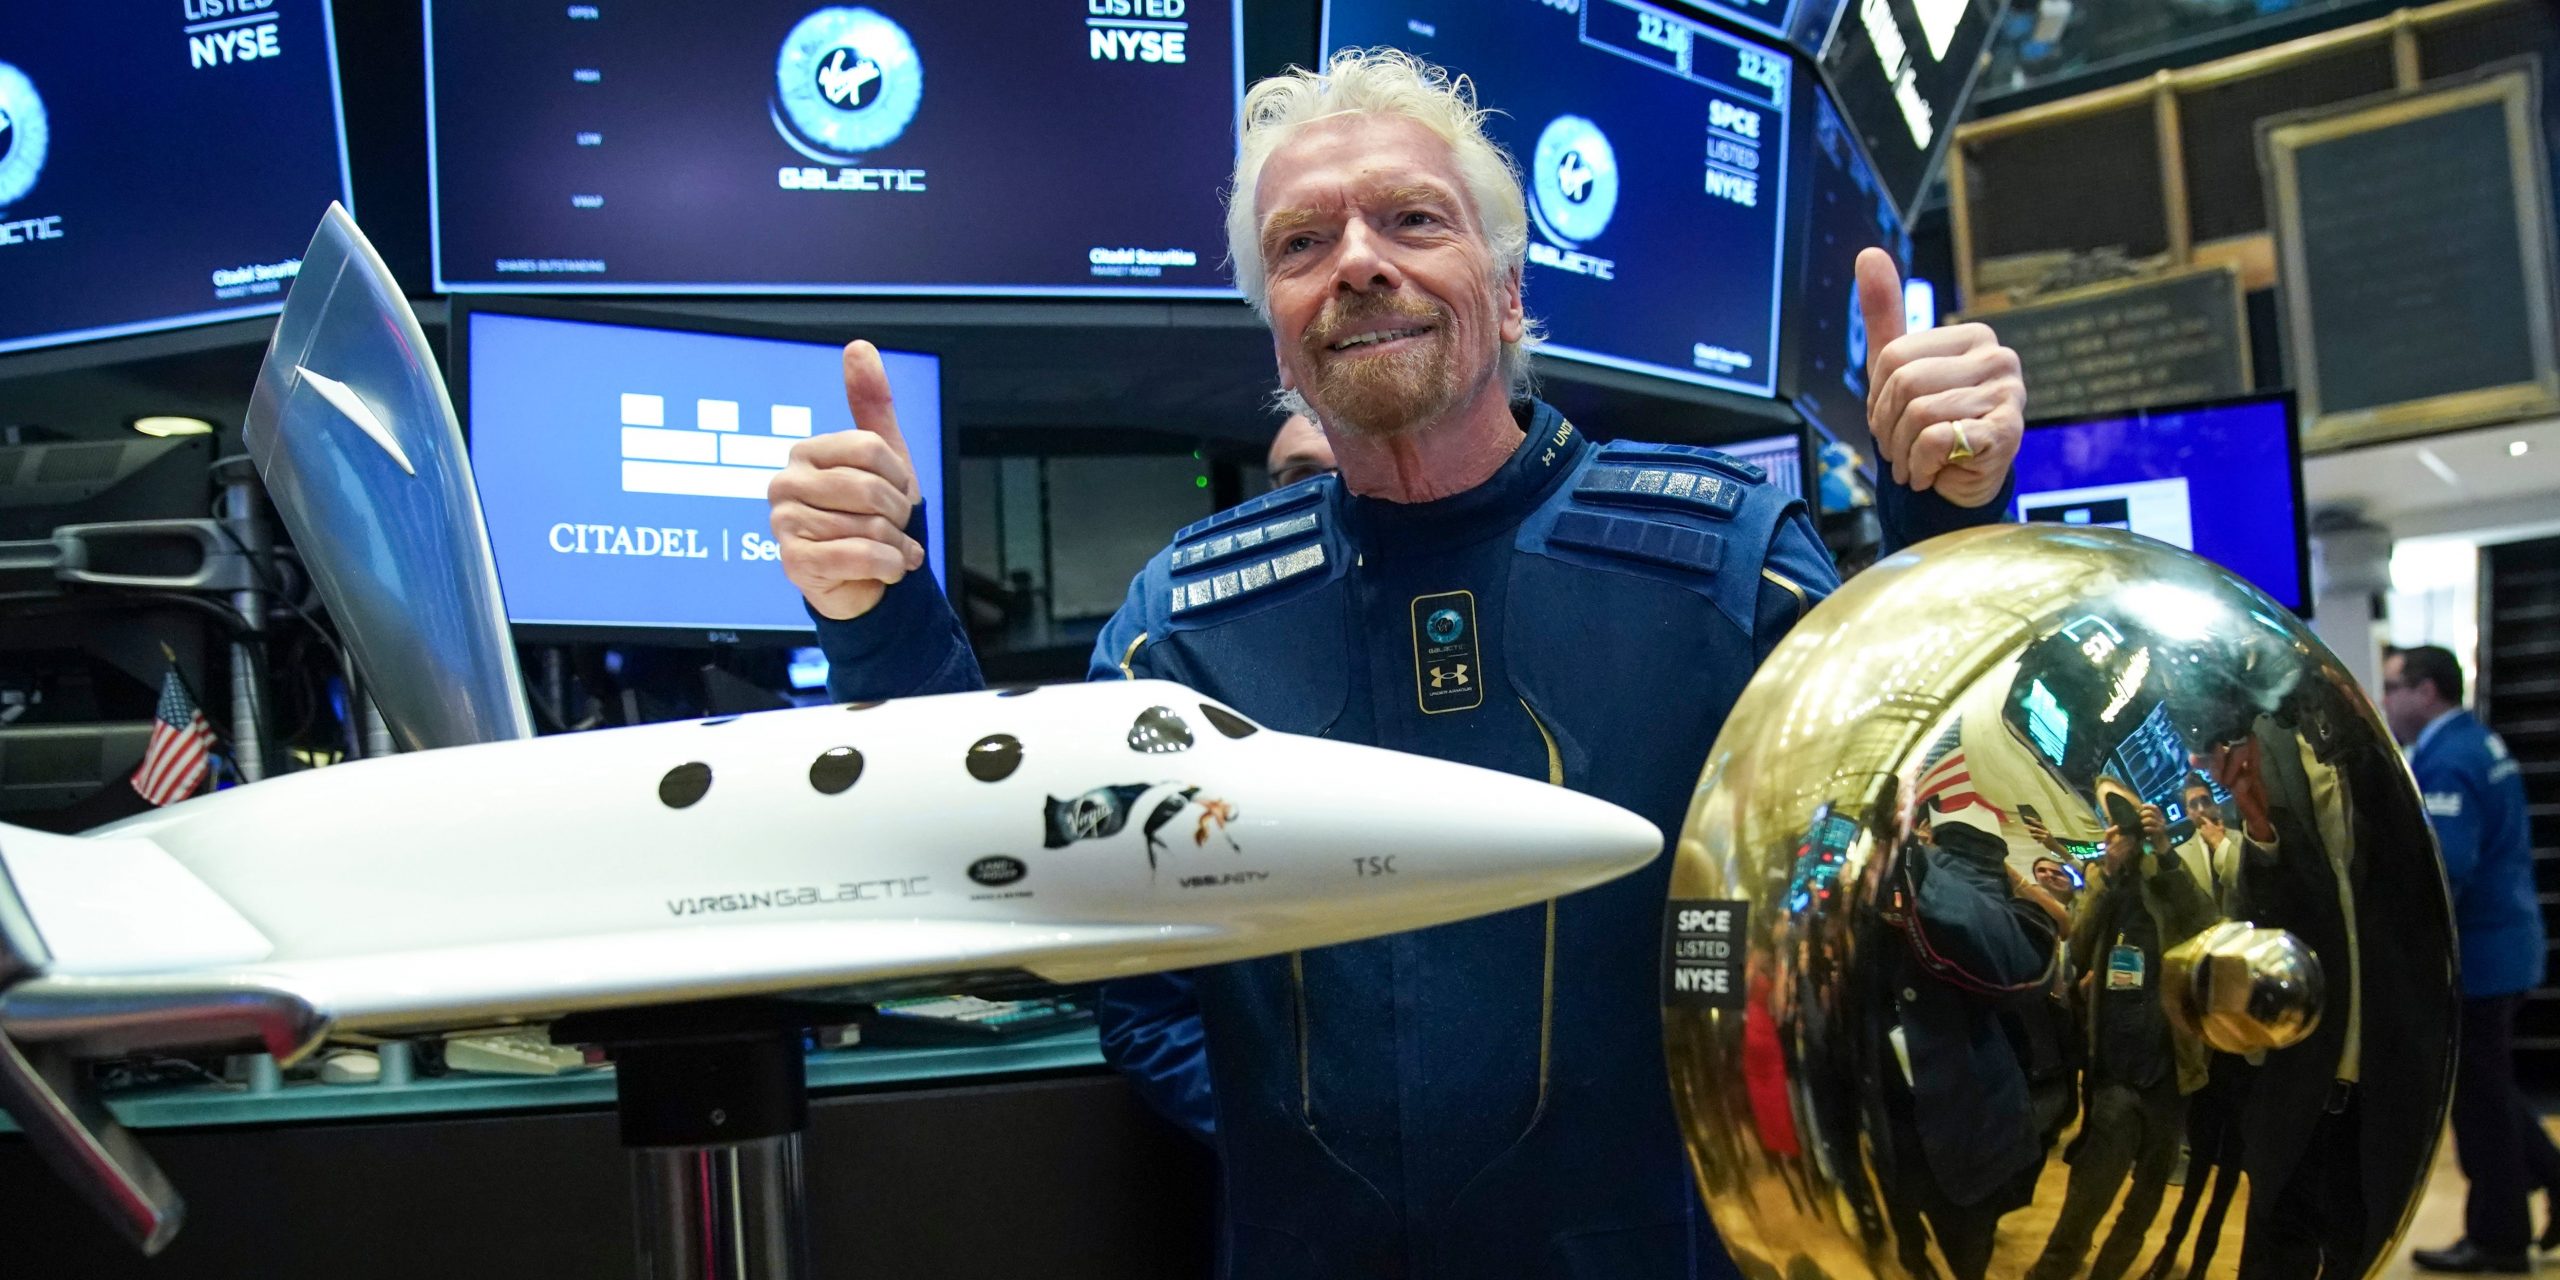 Sir Richard Branson, Founder of Virgin Galactic, poses for photographs before ringing a ceremonial bell on the floor of the New York Stock Exchange (NYSE) to promote the first day of trading of Virgin Galactic Holdings shares on October 28, 2019 in New York City.